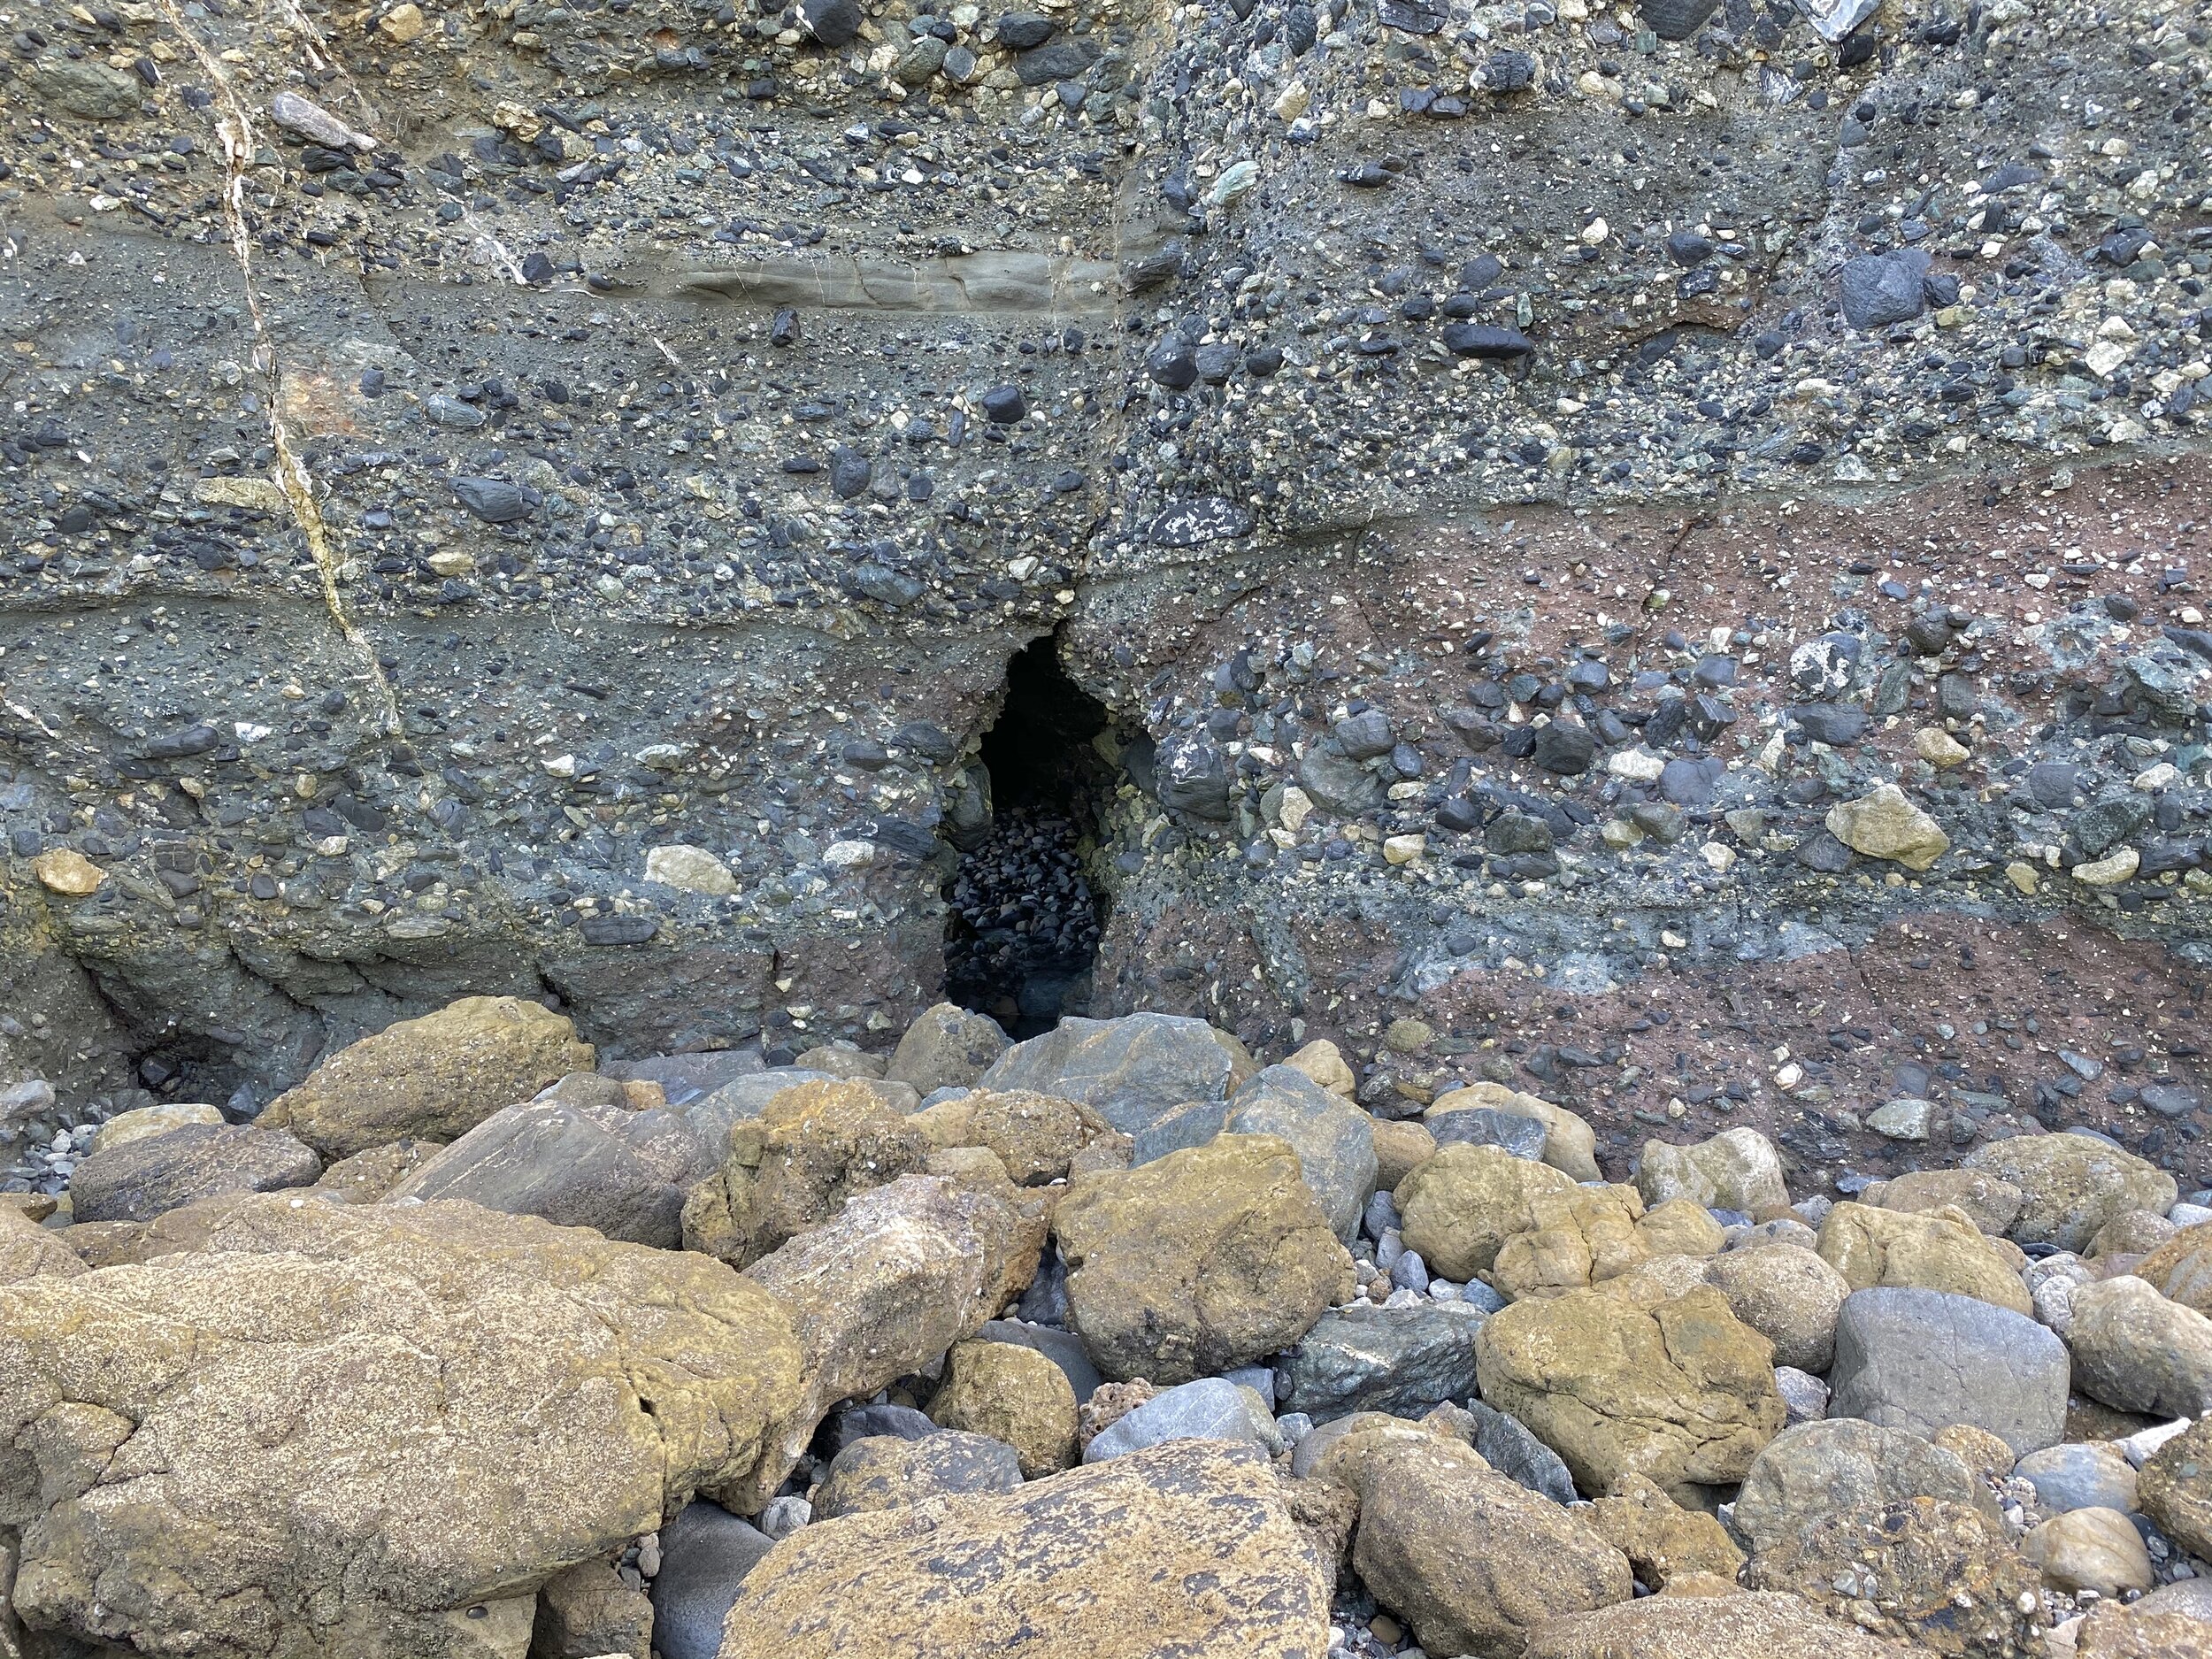 YOU'LL SEE THE SMALL OPENING TO THE CAVE